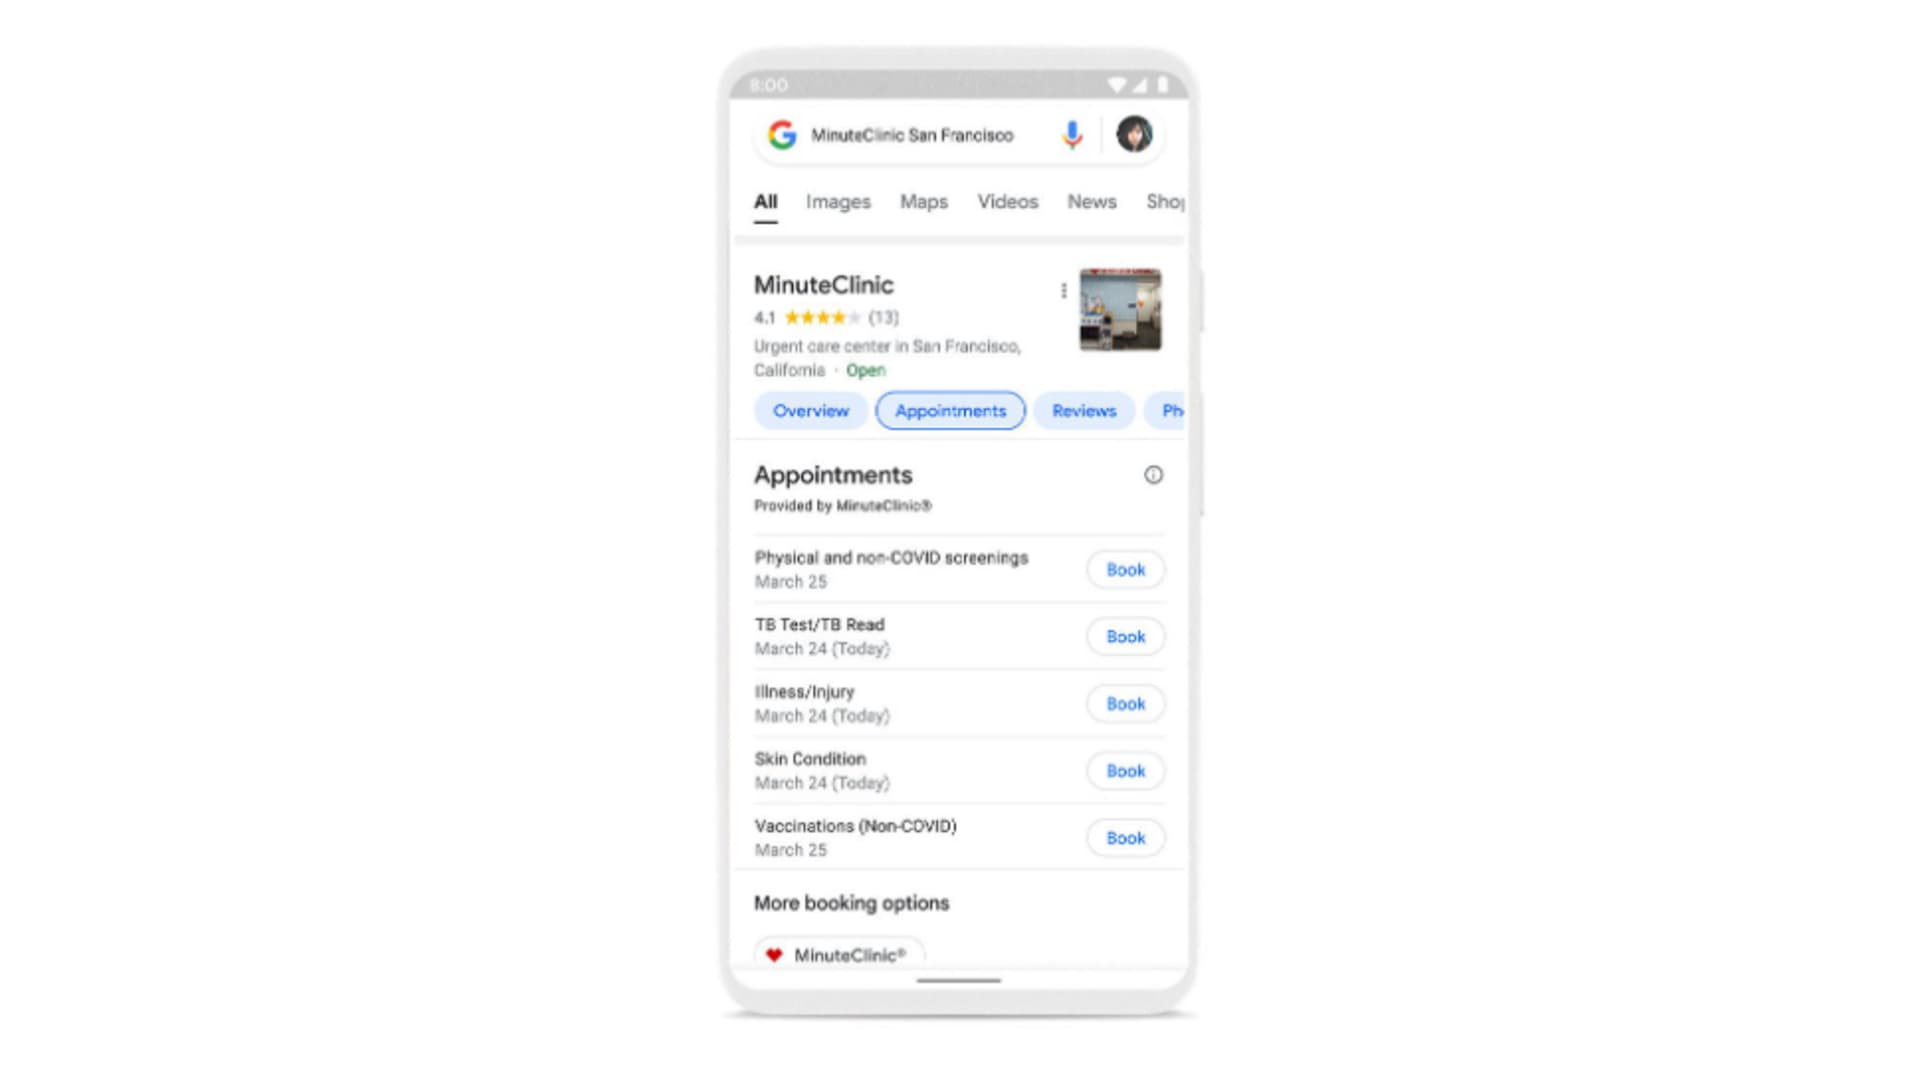 Google will let you book appointments through Search.